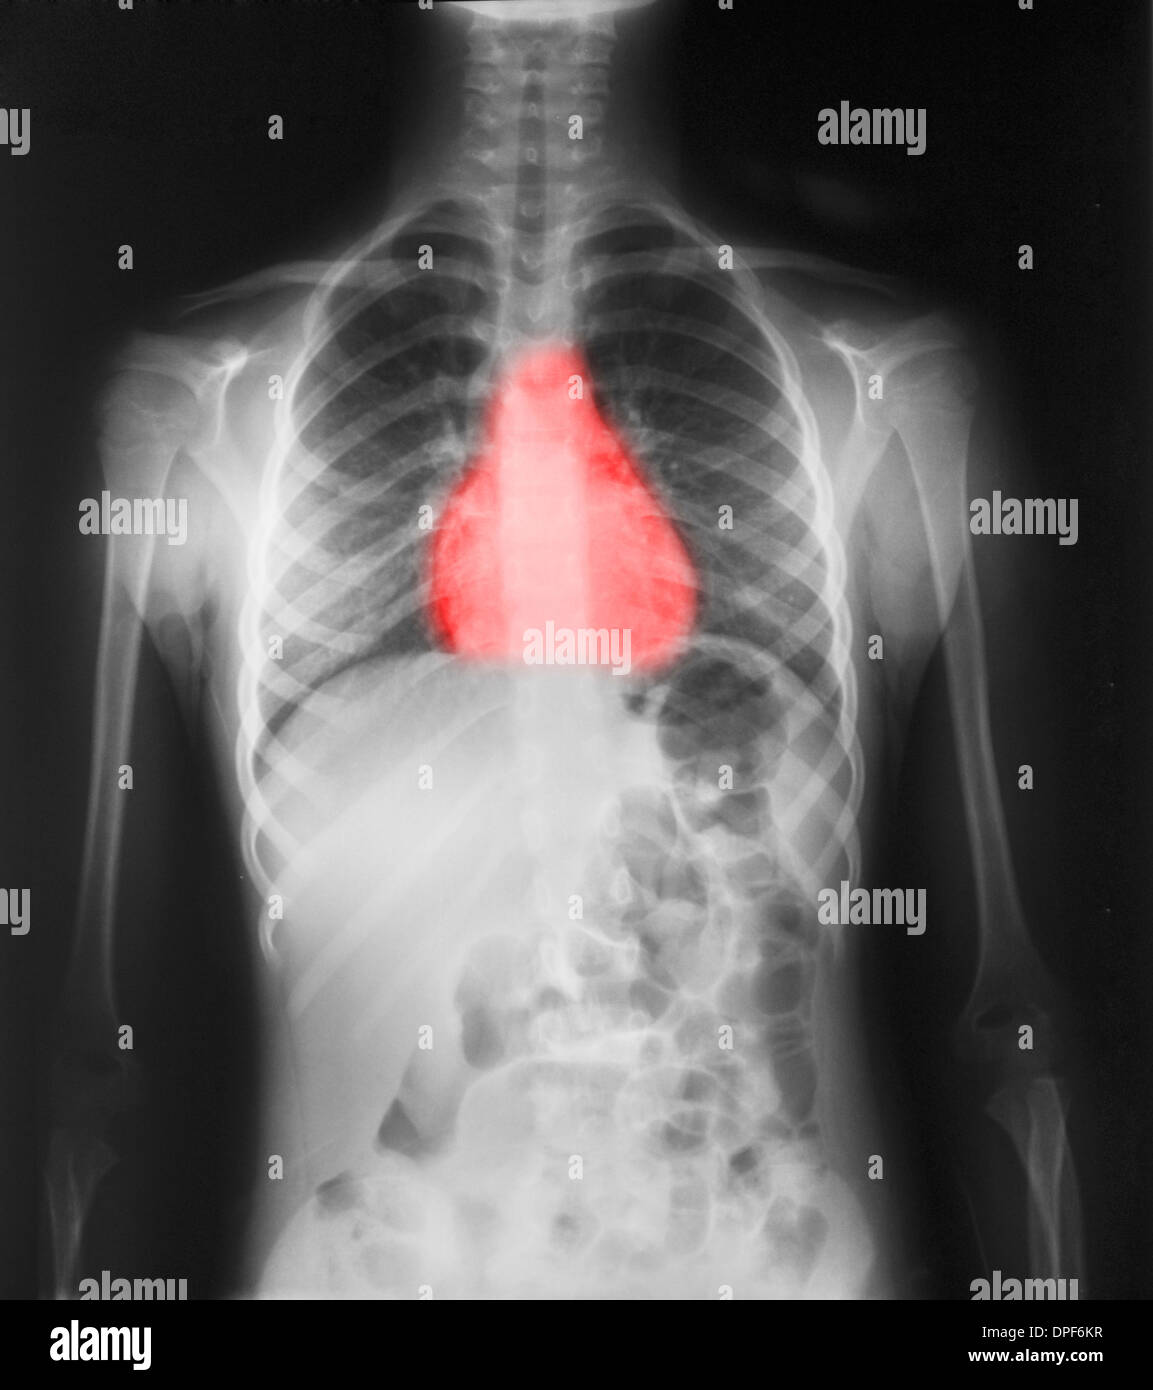 Normal chest x-ray of 7 year old girl Stock Photo - Alamy